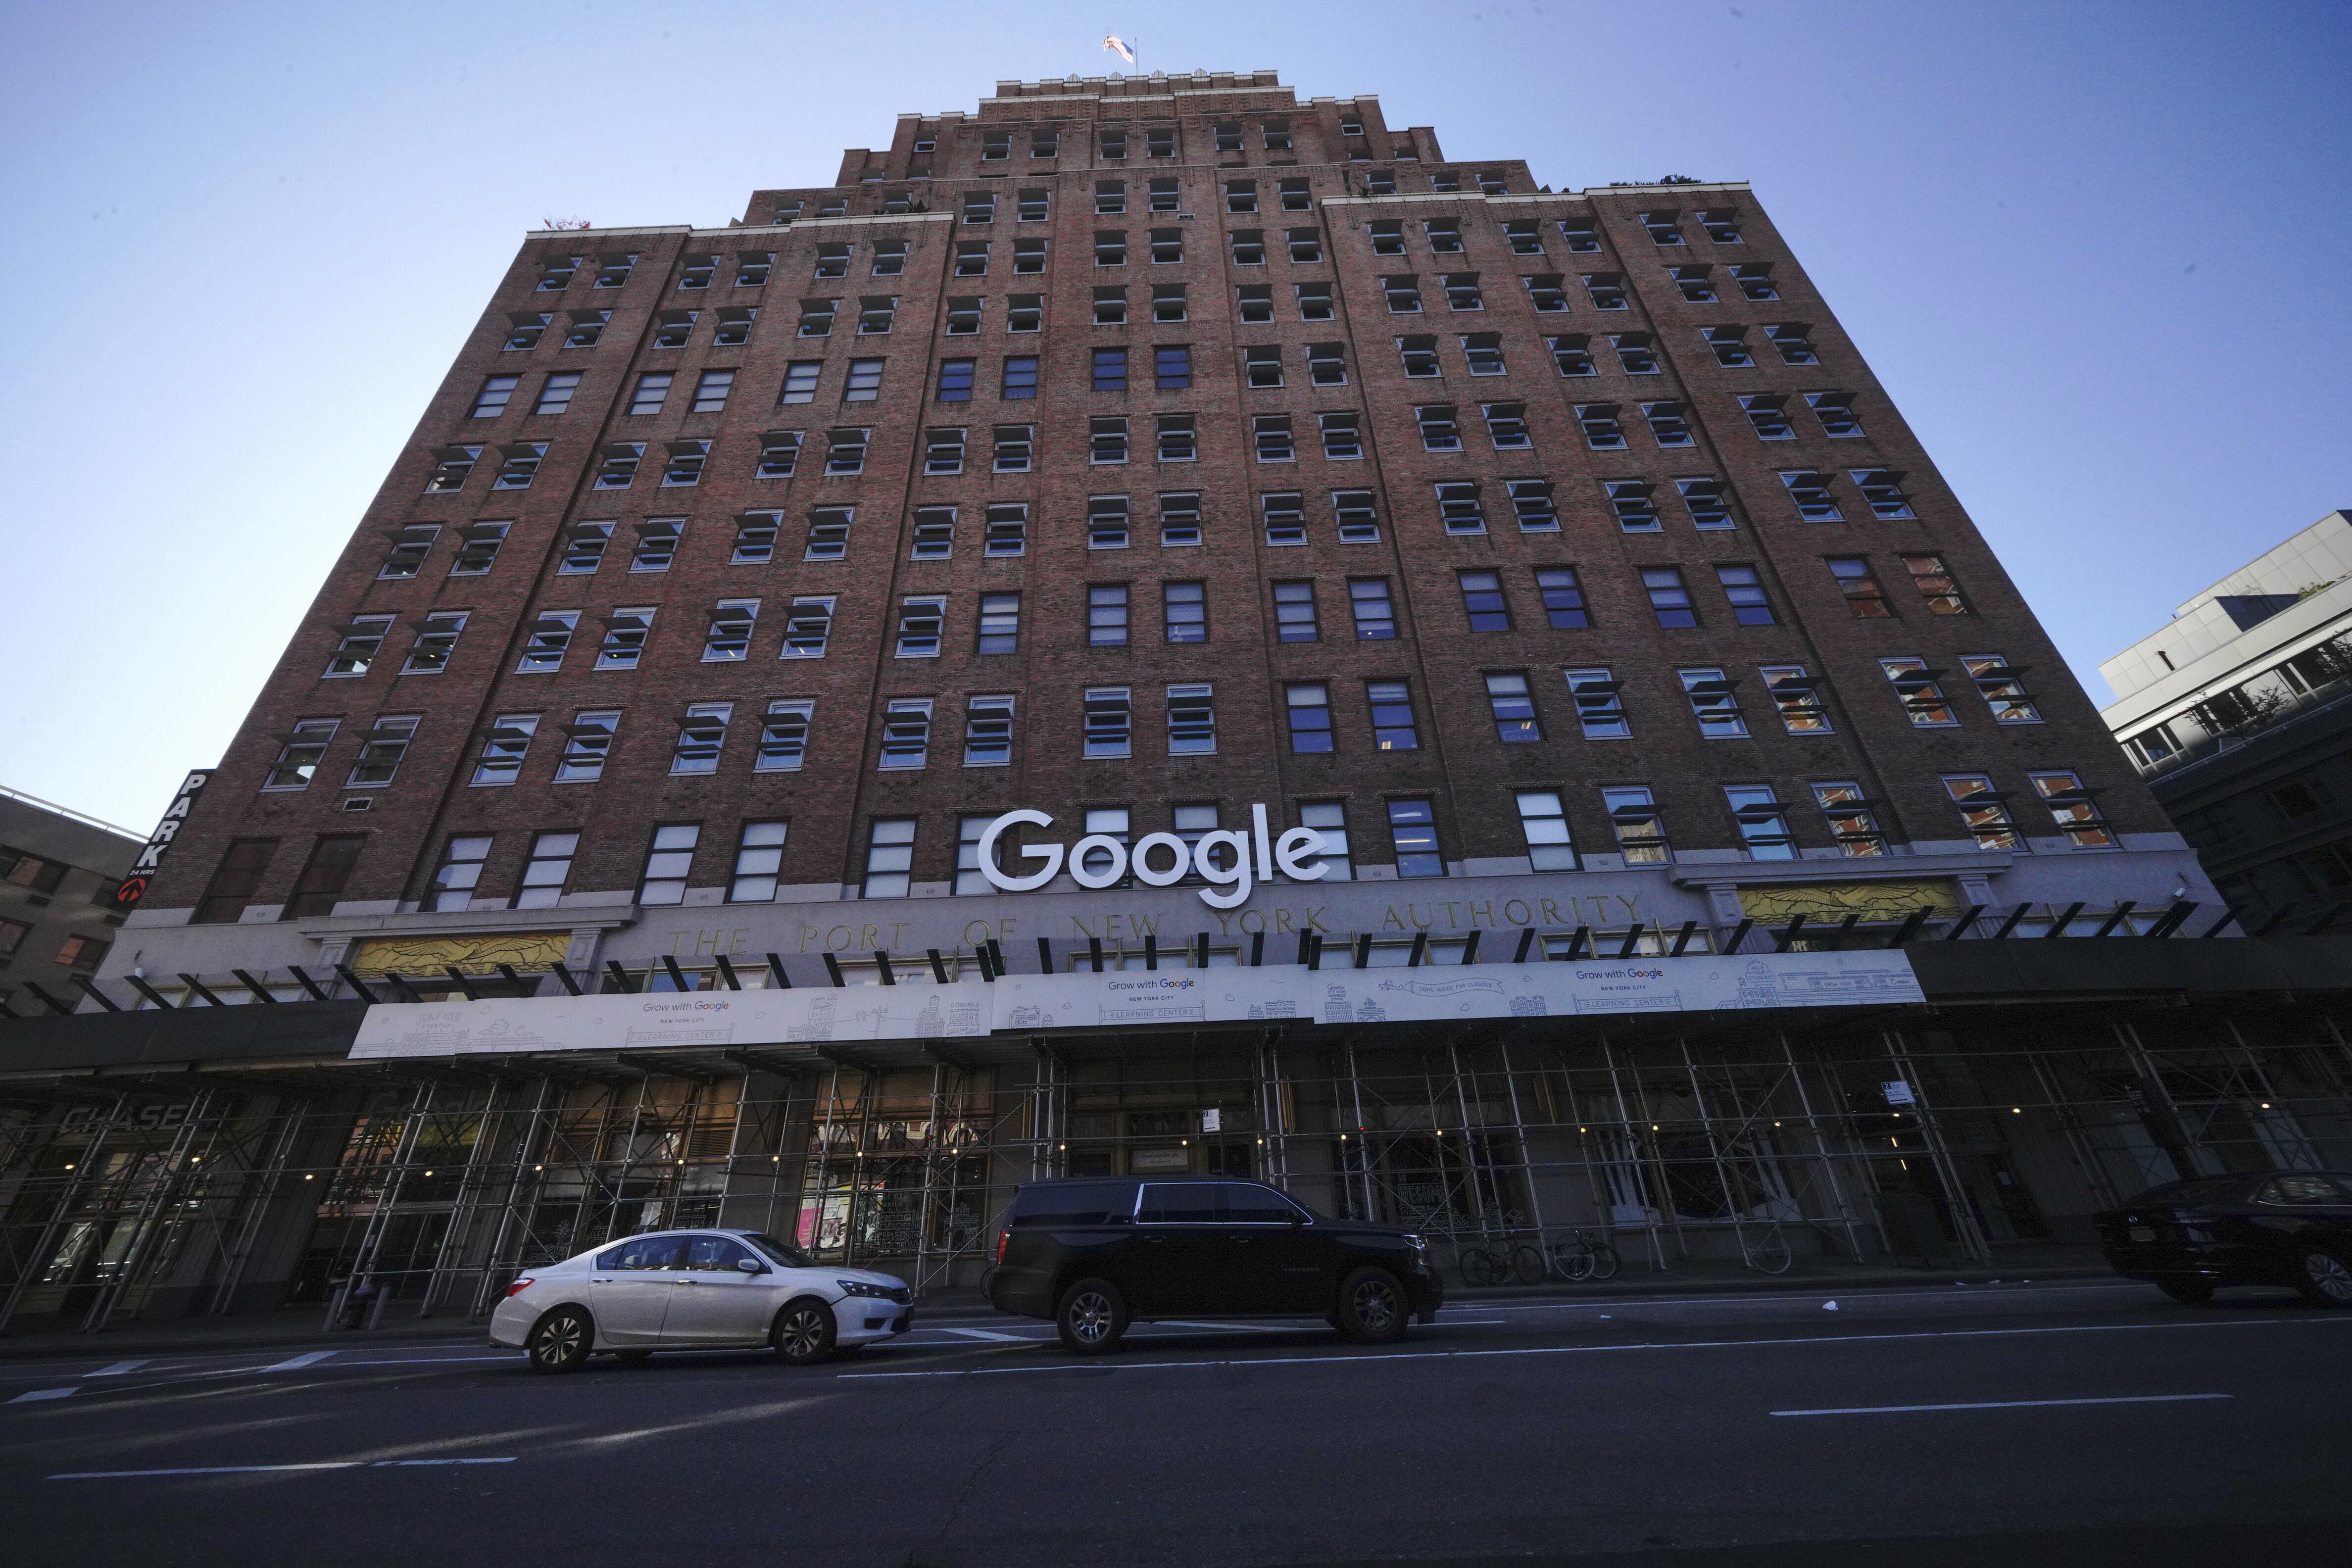 A high-rise brick building with a bright white “Google” sign on the facade.